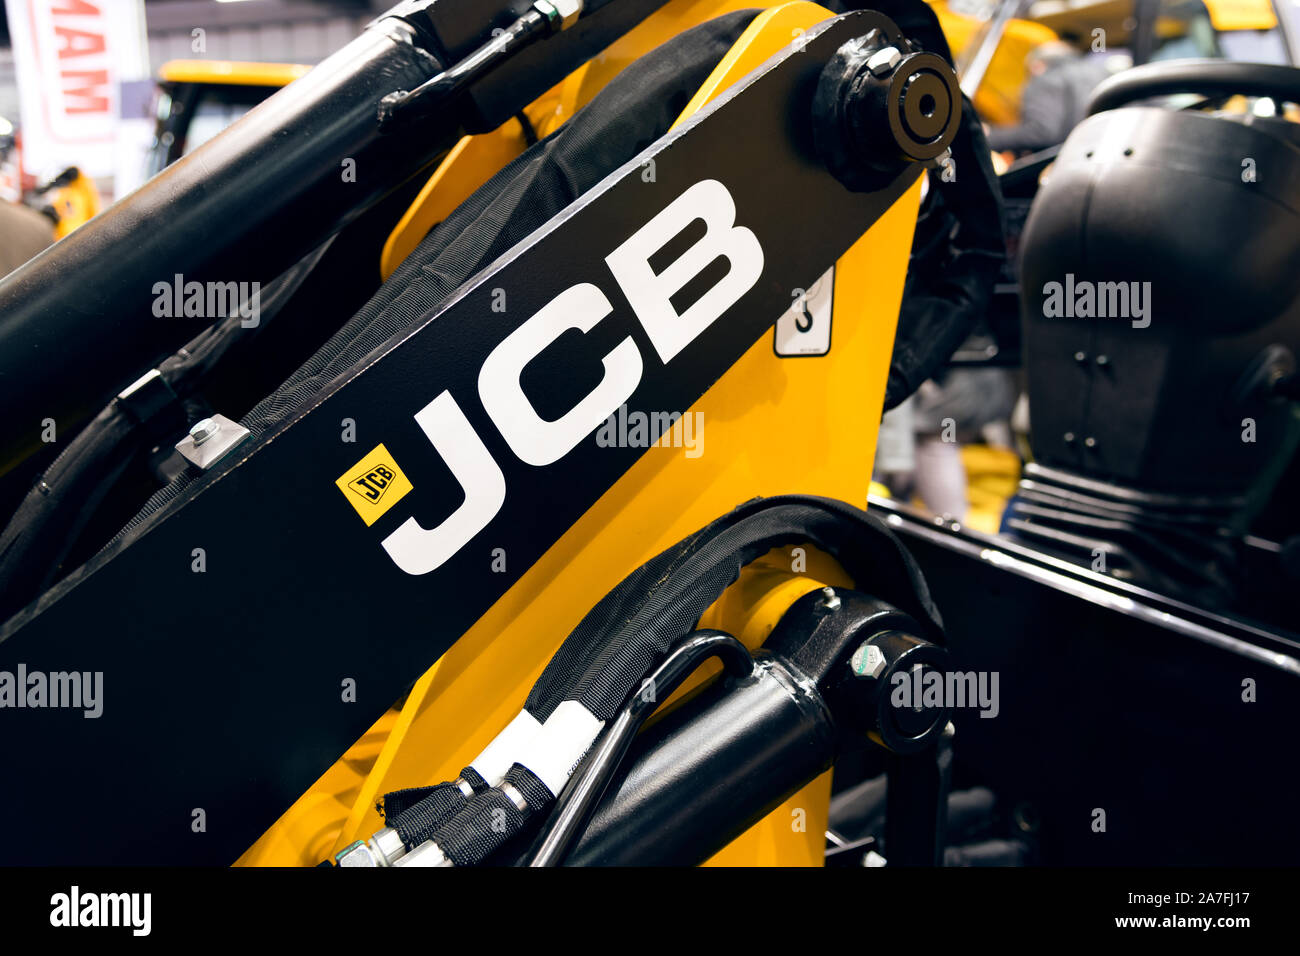 Kielce, Poland, March 16, 2019: JCB sign on a heavy machinery. J.C. Bamford Excavators Ltd. is a British manufacturer of heavy industrial and agricult Stock Photo